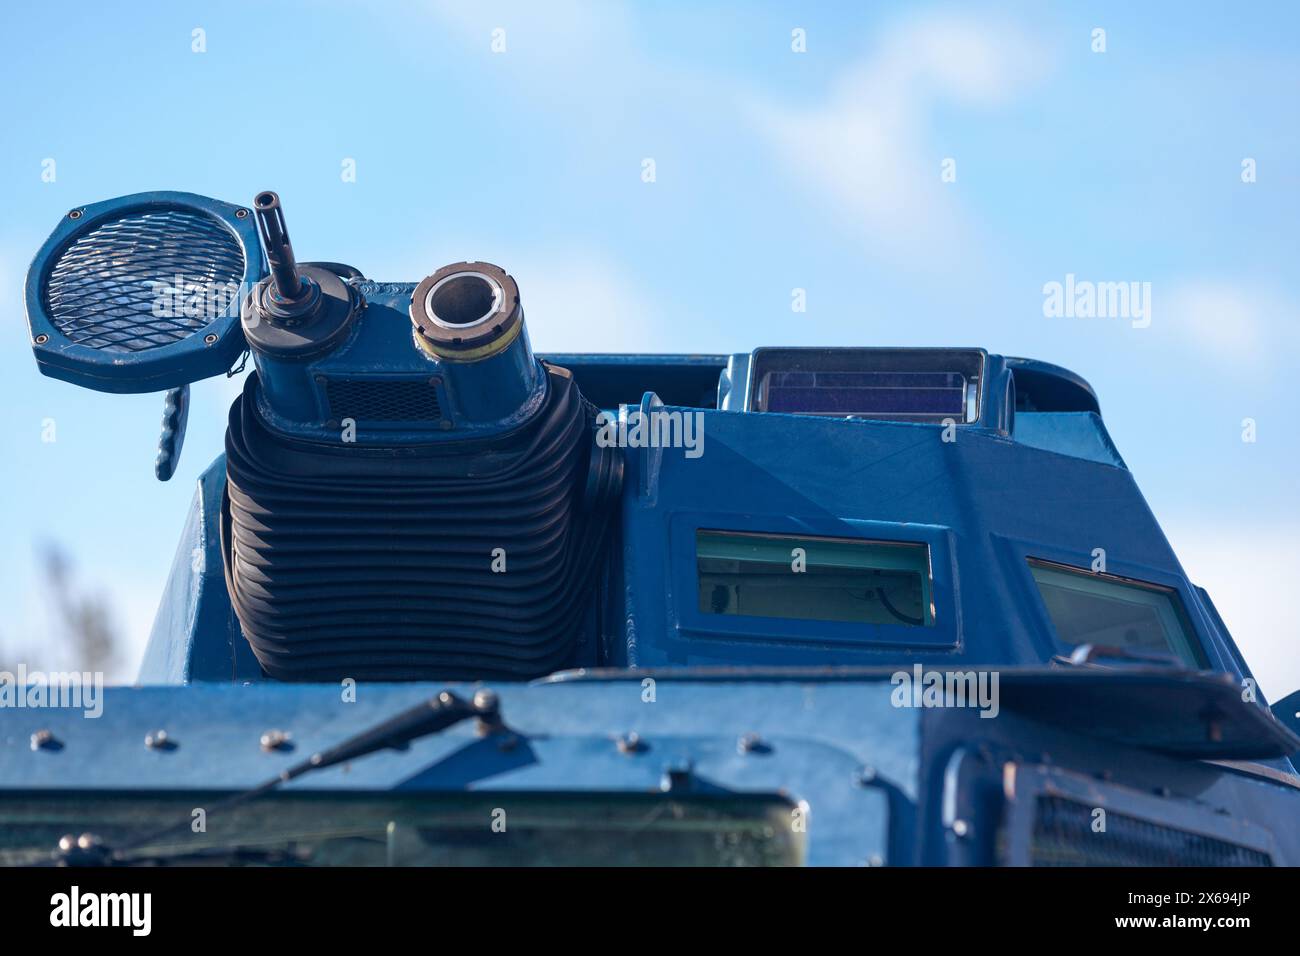 Close up on the machine gun and grenade launcher of an armored vehicle from the GBGM (Groupement blindé de gendarmerie mobile). Stock Photo